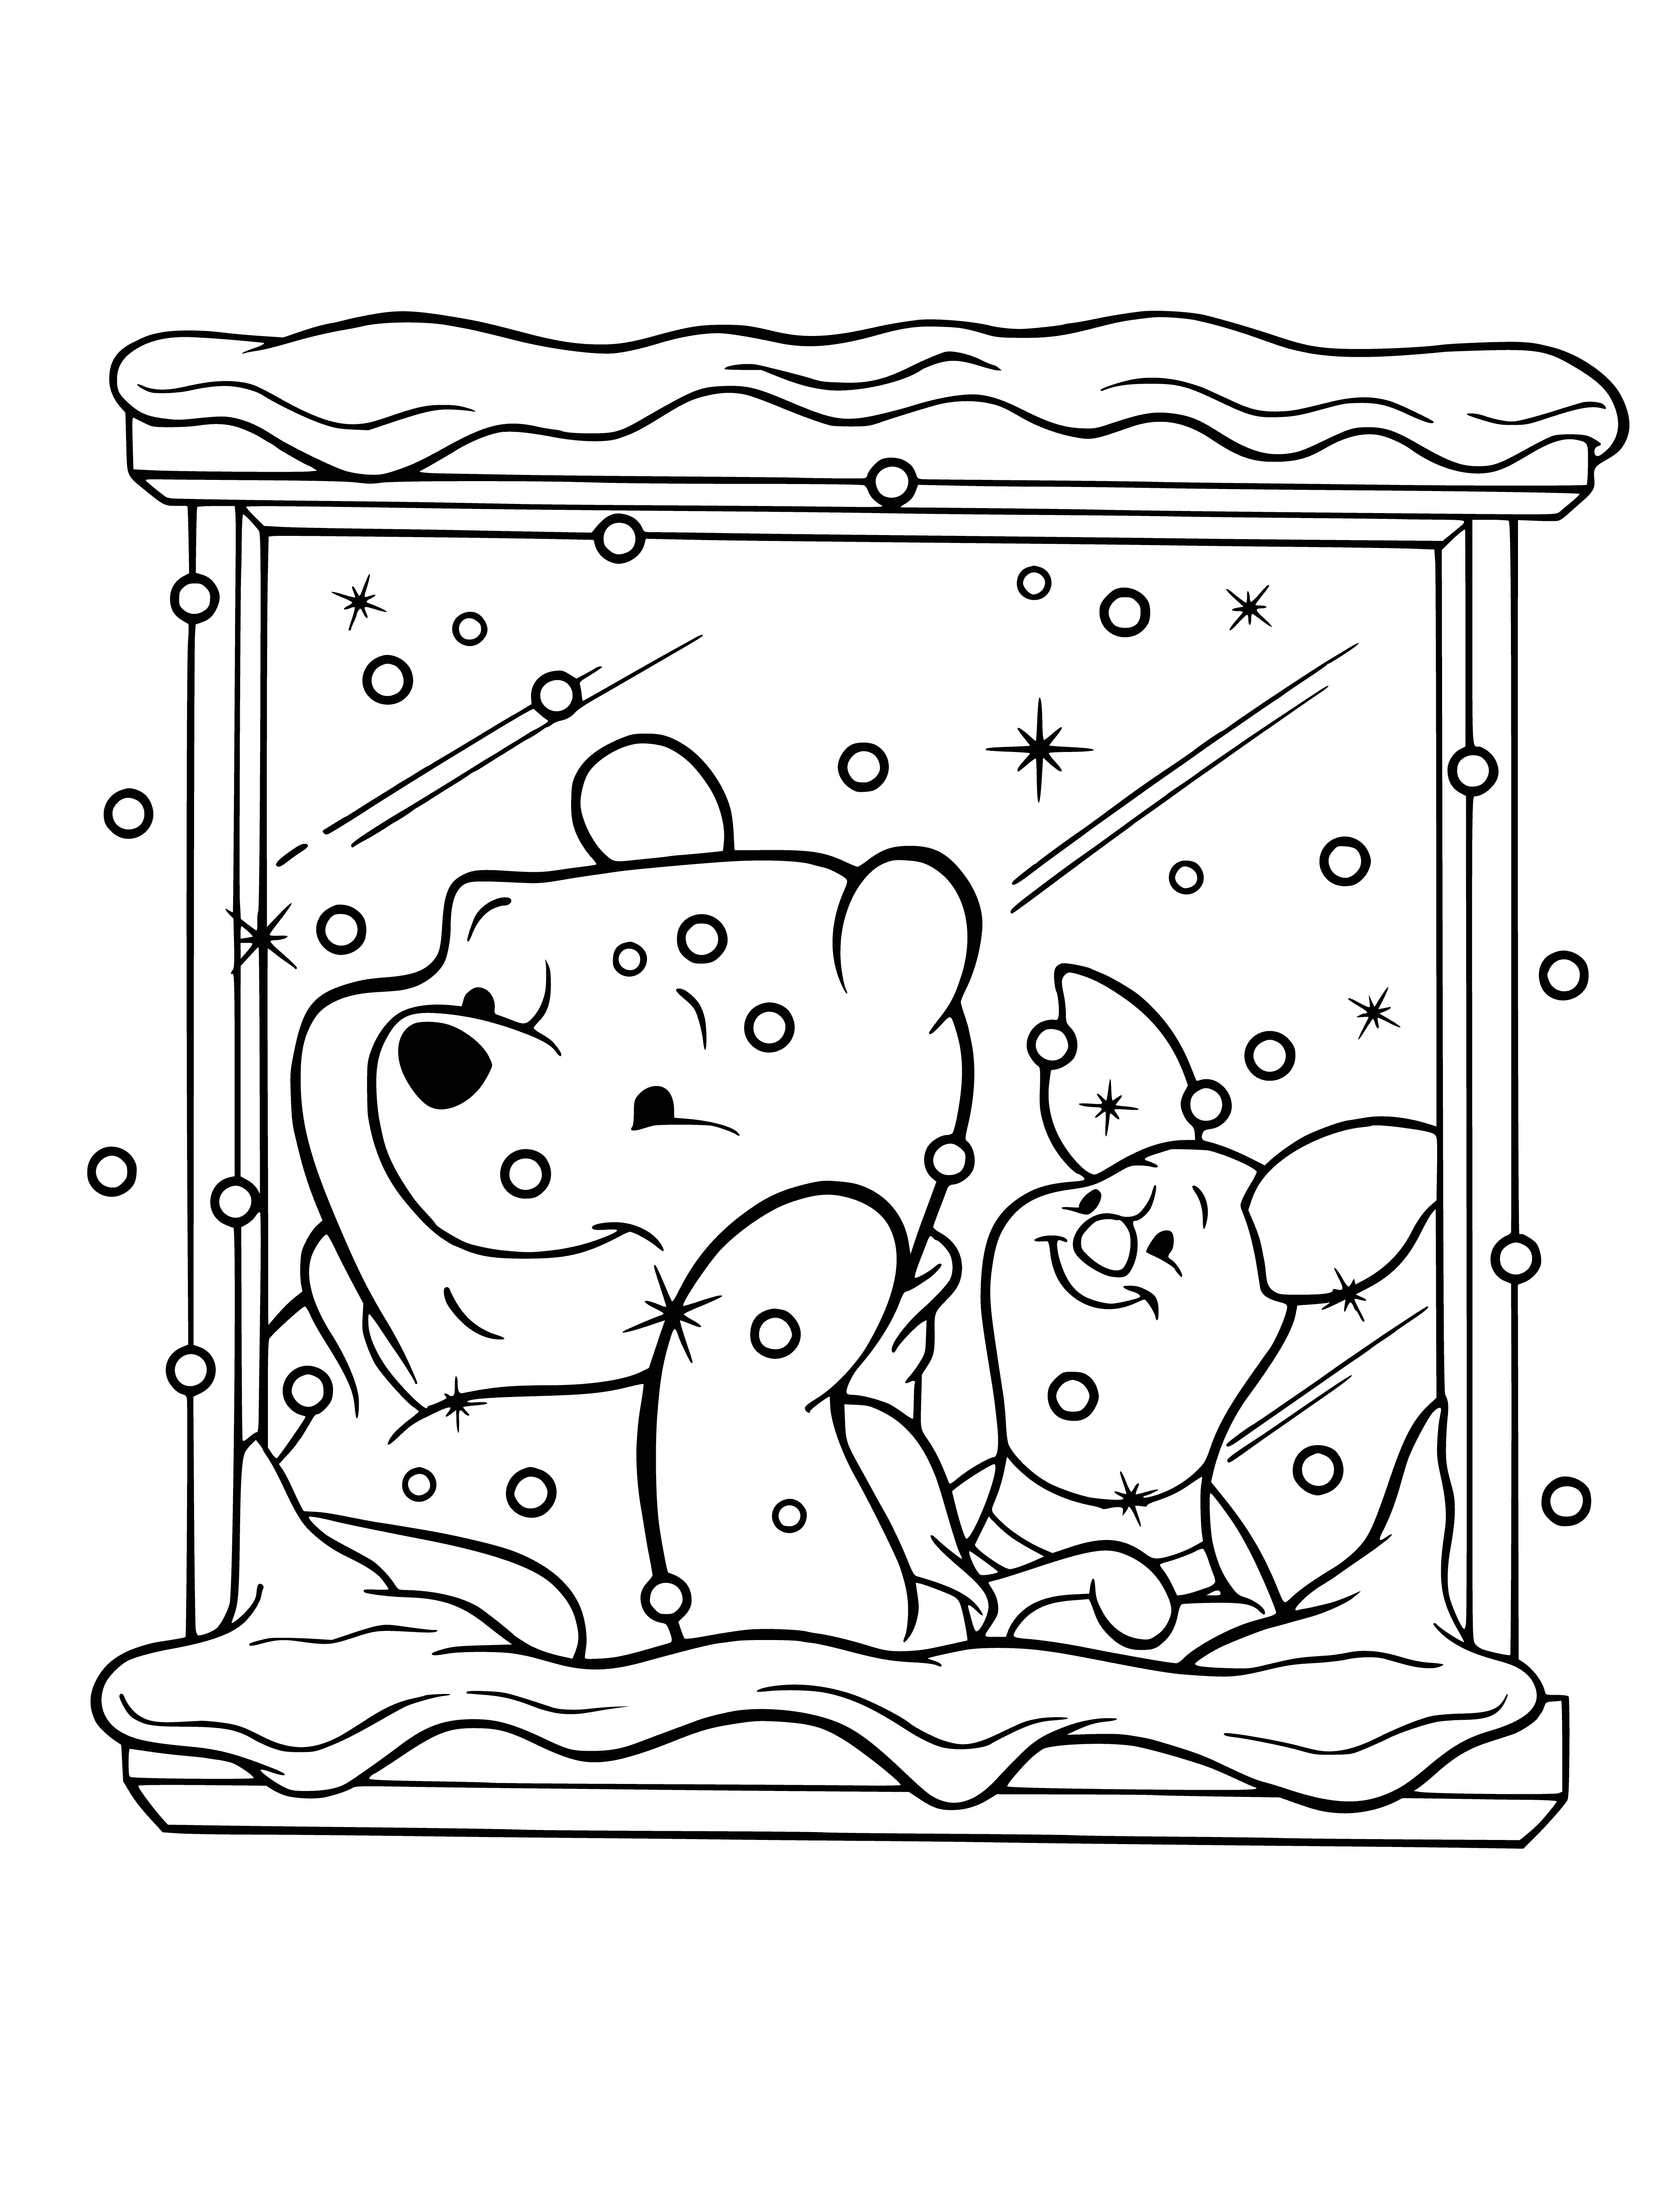 coloring page: Winnie watches the setting sun, a snowman in his arms, as trees of all sizes & colors cast shadows on the snowy ground.